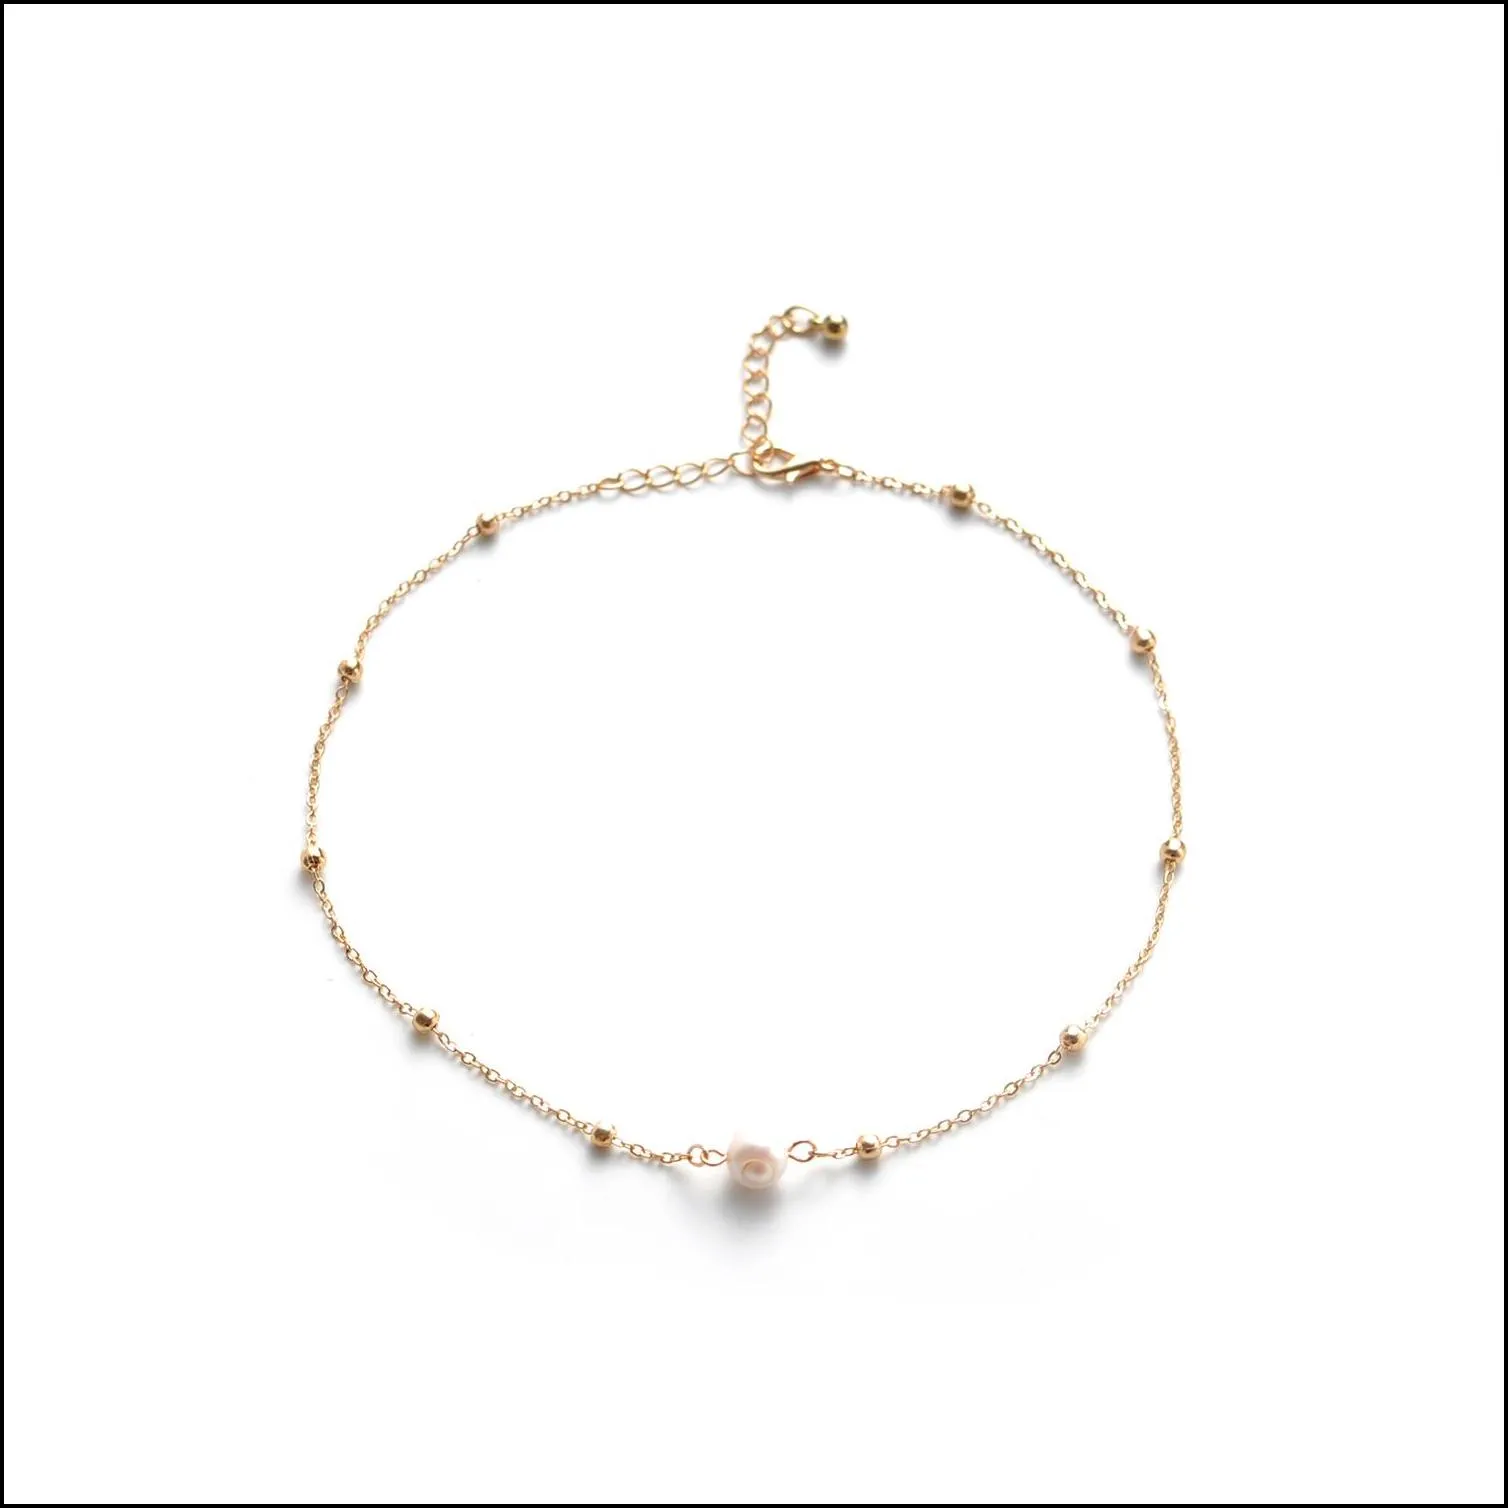 pearl choker dainty adjustable necklace 18k gold plated cultured barque pearls tiny chain delicate mothers valentine jewelry